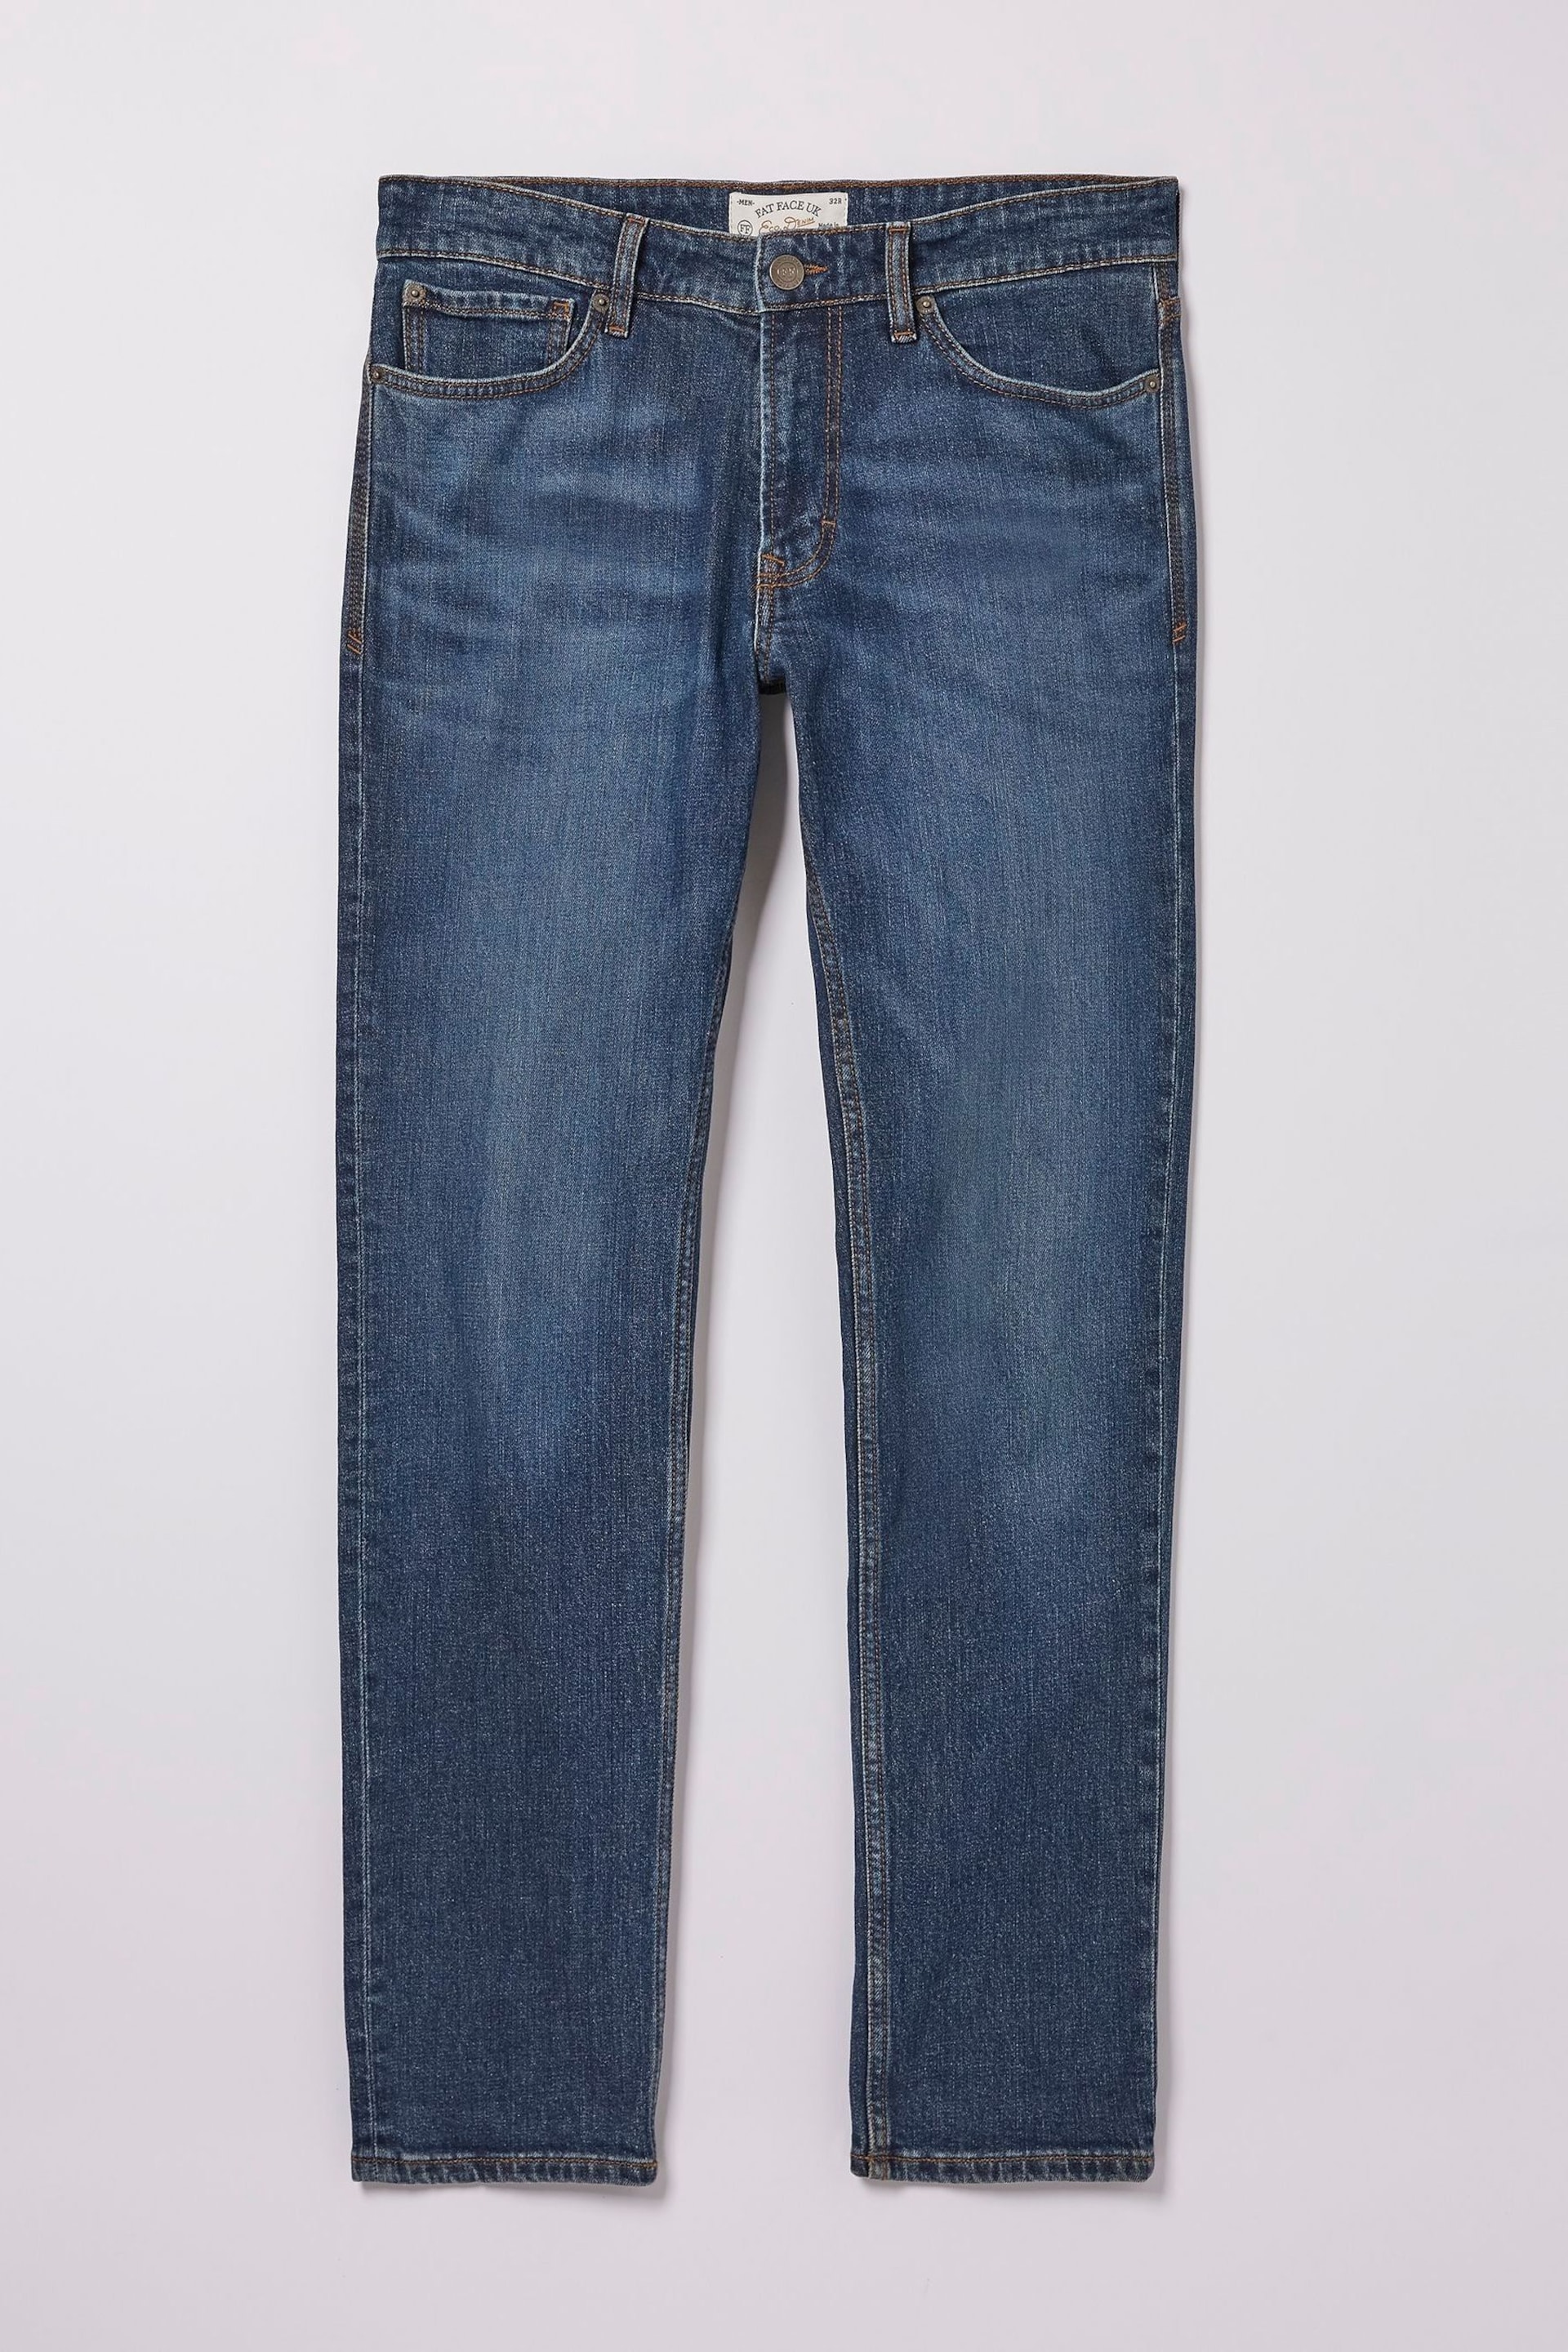 FatFace Blue Slim Mid Wash Jeans - Image 4 of 4